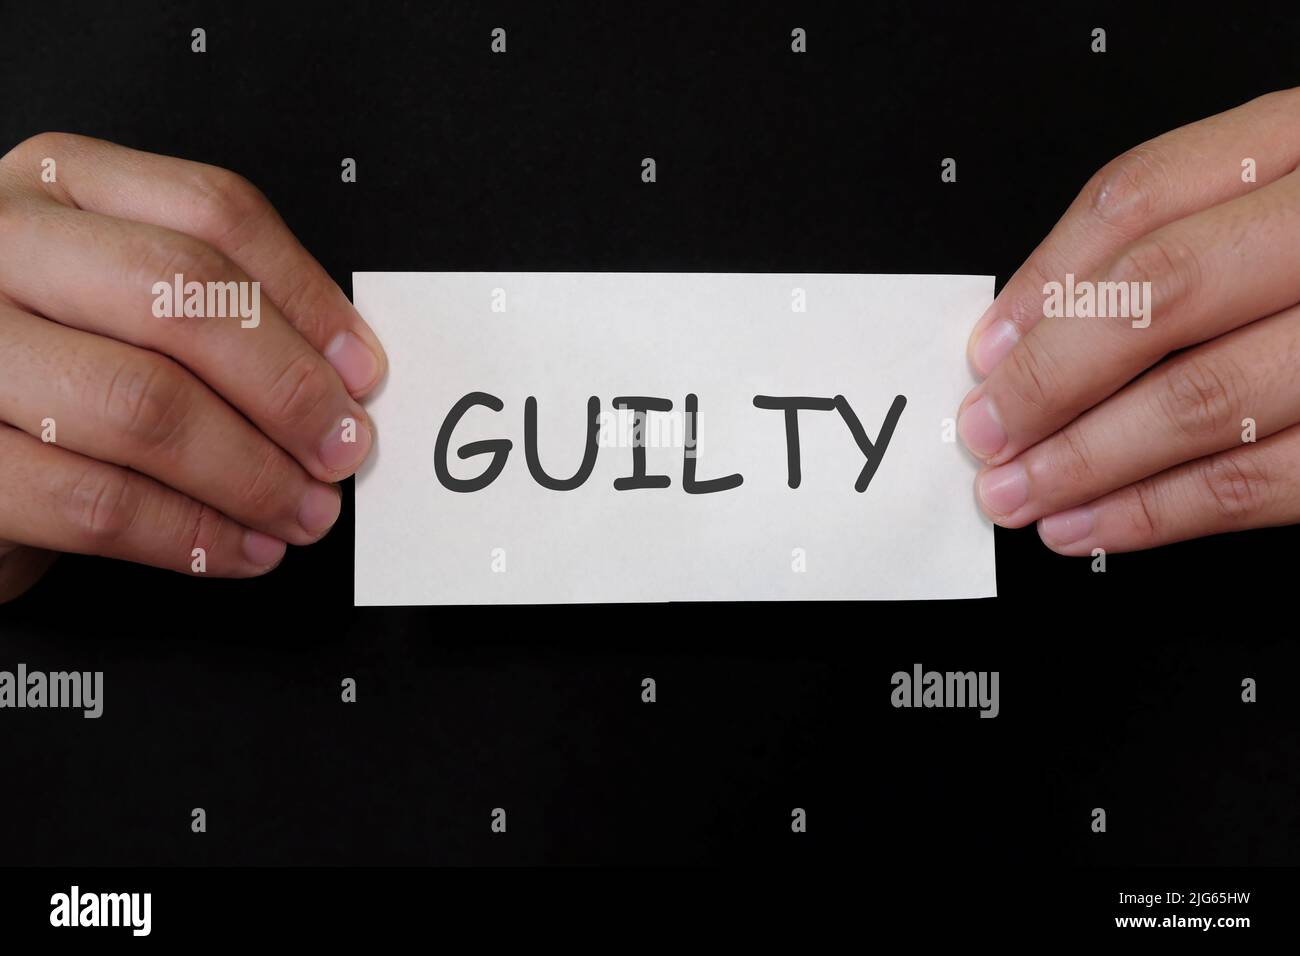 Guilty verdict concept. Criminal hands holding paper placard mug shot with written word in dark black background. Stock Photo